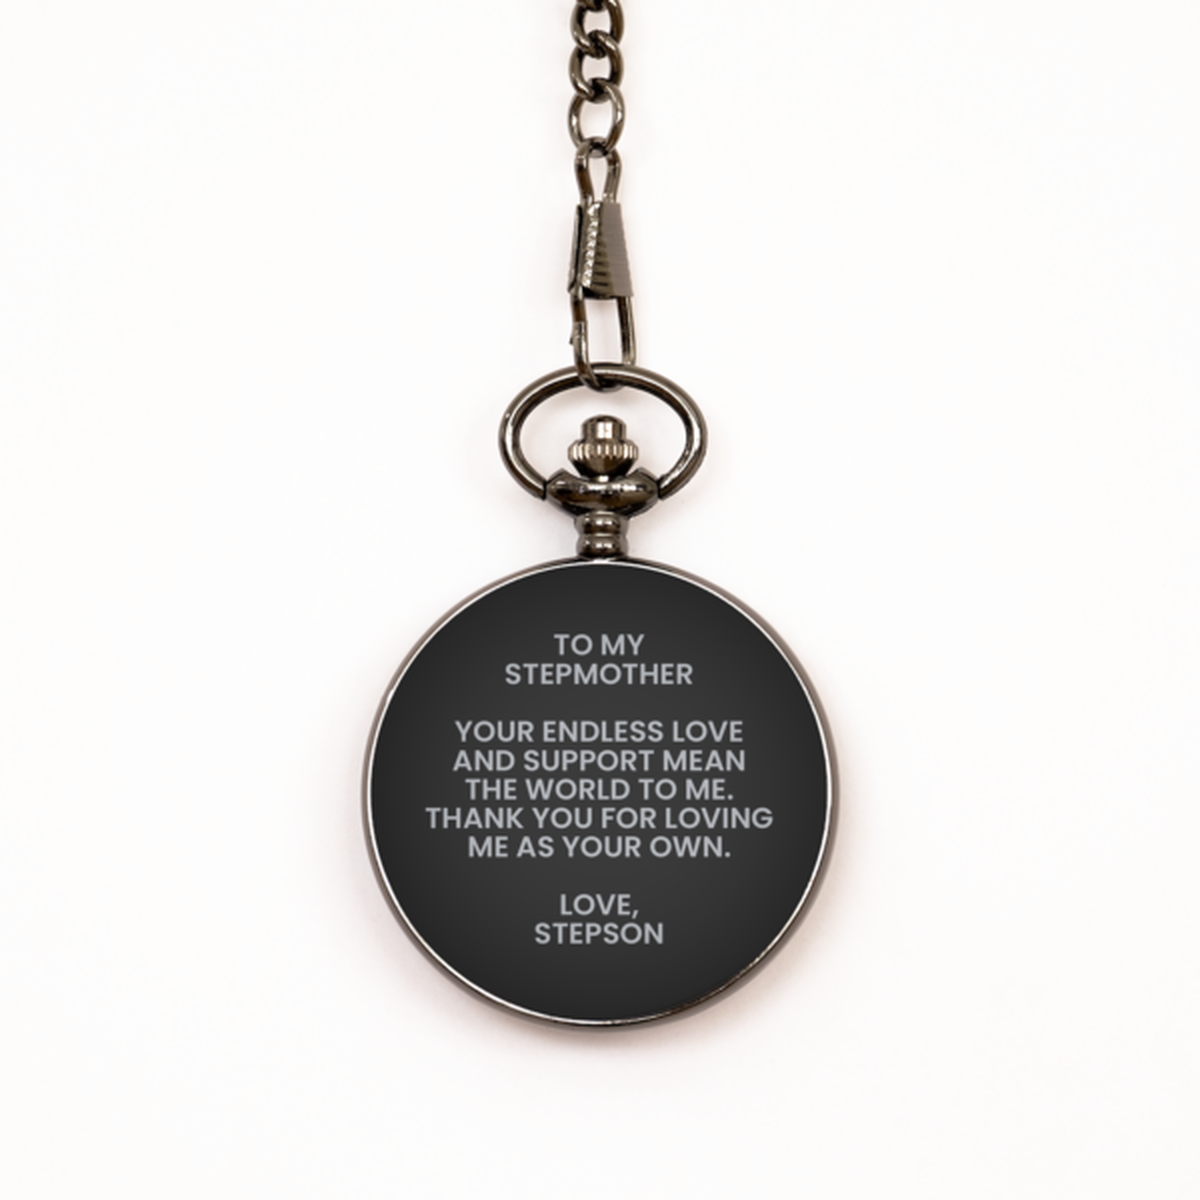 To My Stepmother Black Pocket Watch, Your Endless Love, Mothers Day Gifts For Stepmother From Stepson, Birthday Gifts For Women